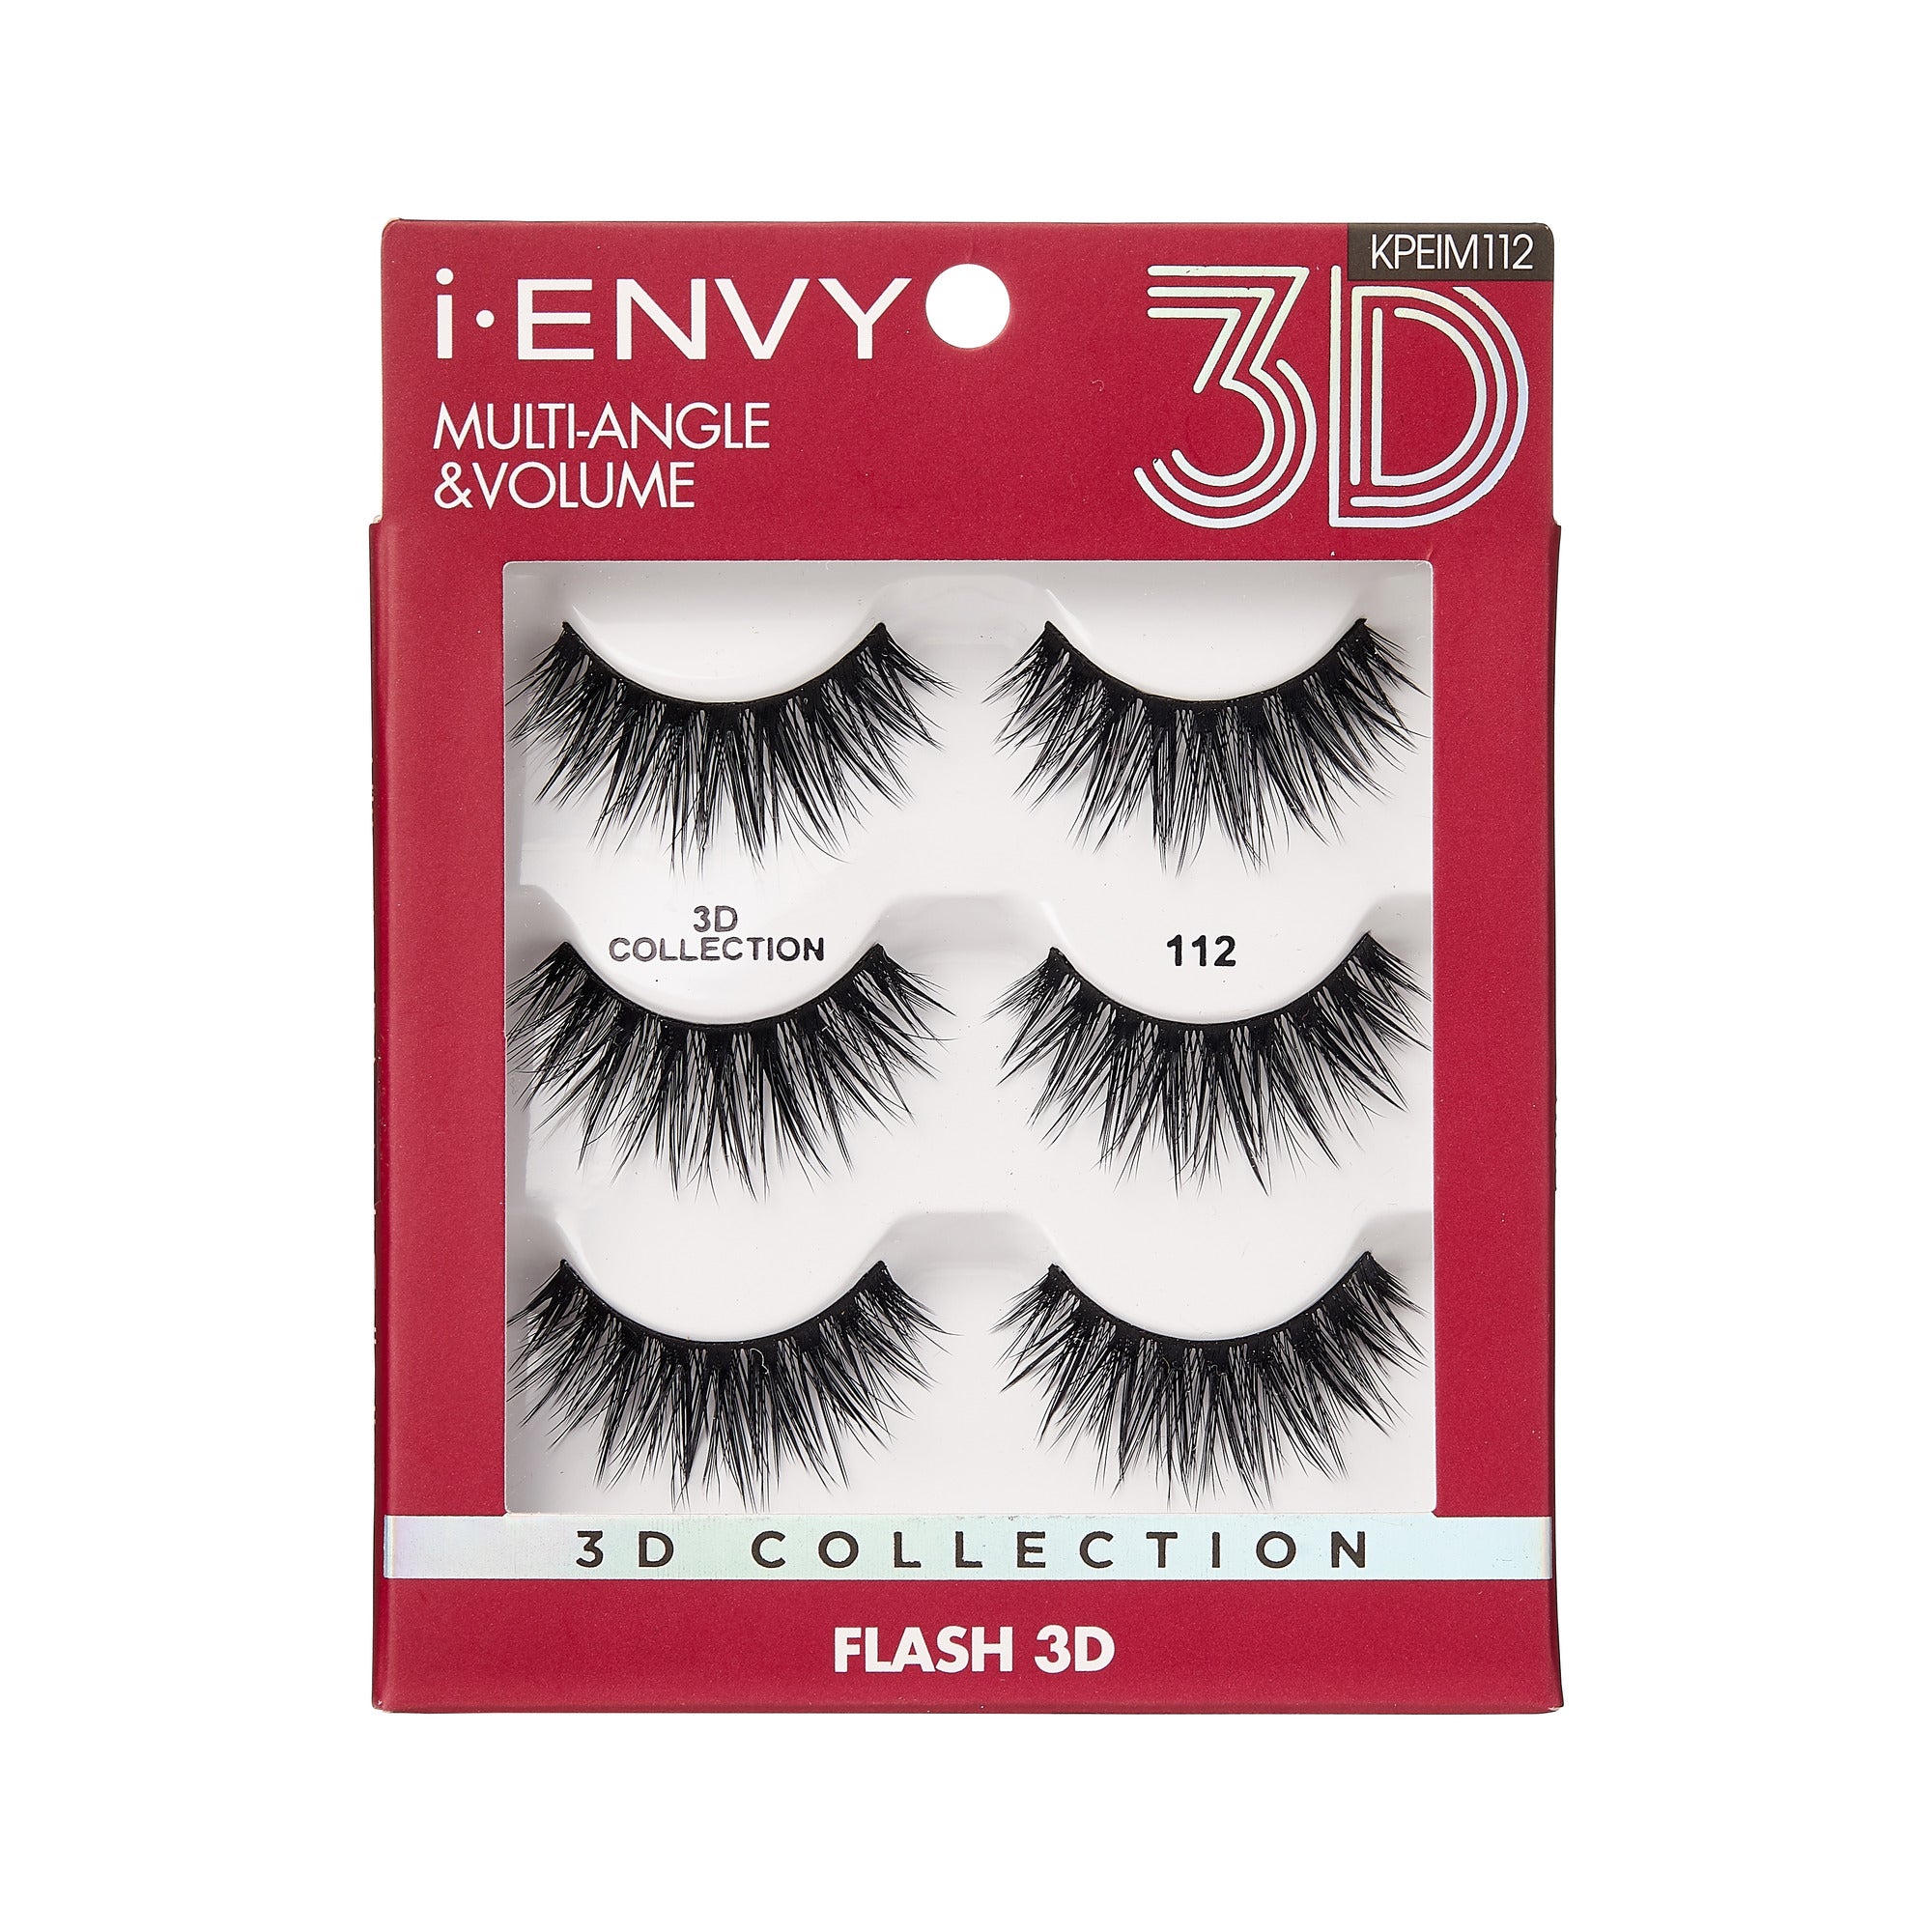 I.Envy By Kiss 3D Lashes Multi Pack Multiangle & Volume Collection-112 (KPEIM112)